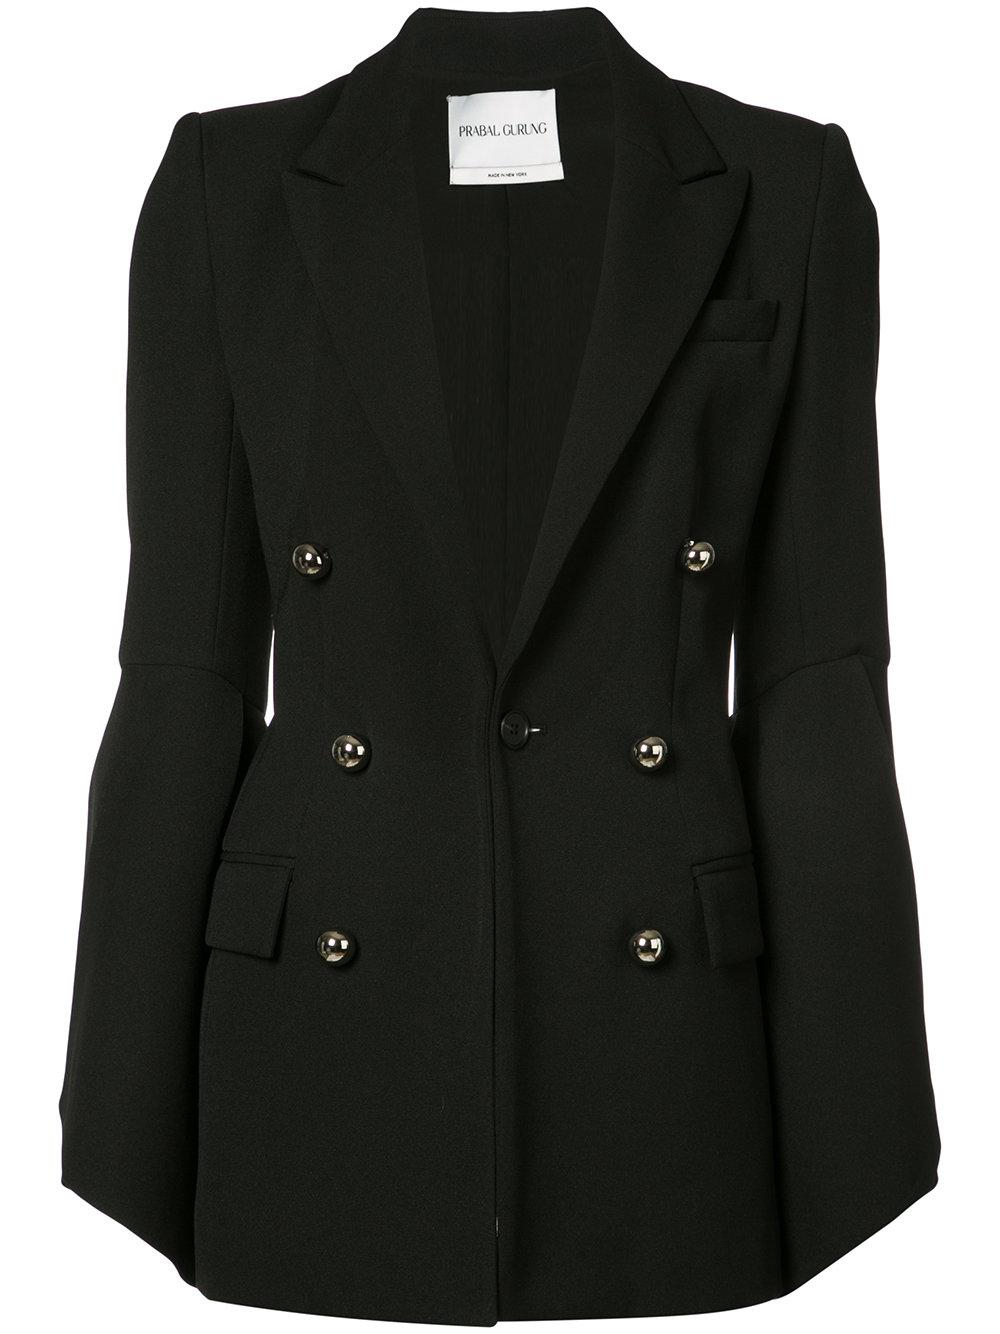 Prabal gurung Double Breasted Tailored Jacket in Black | Lyst